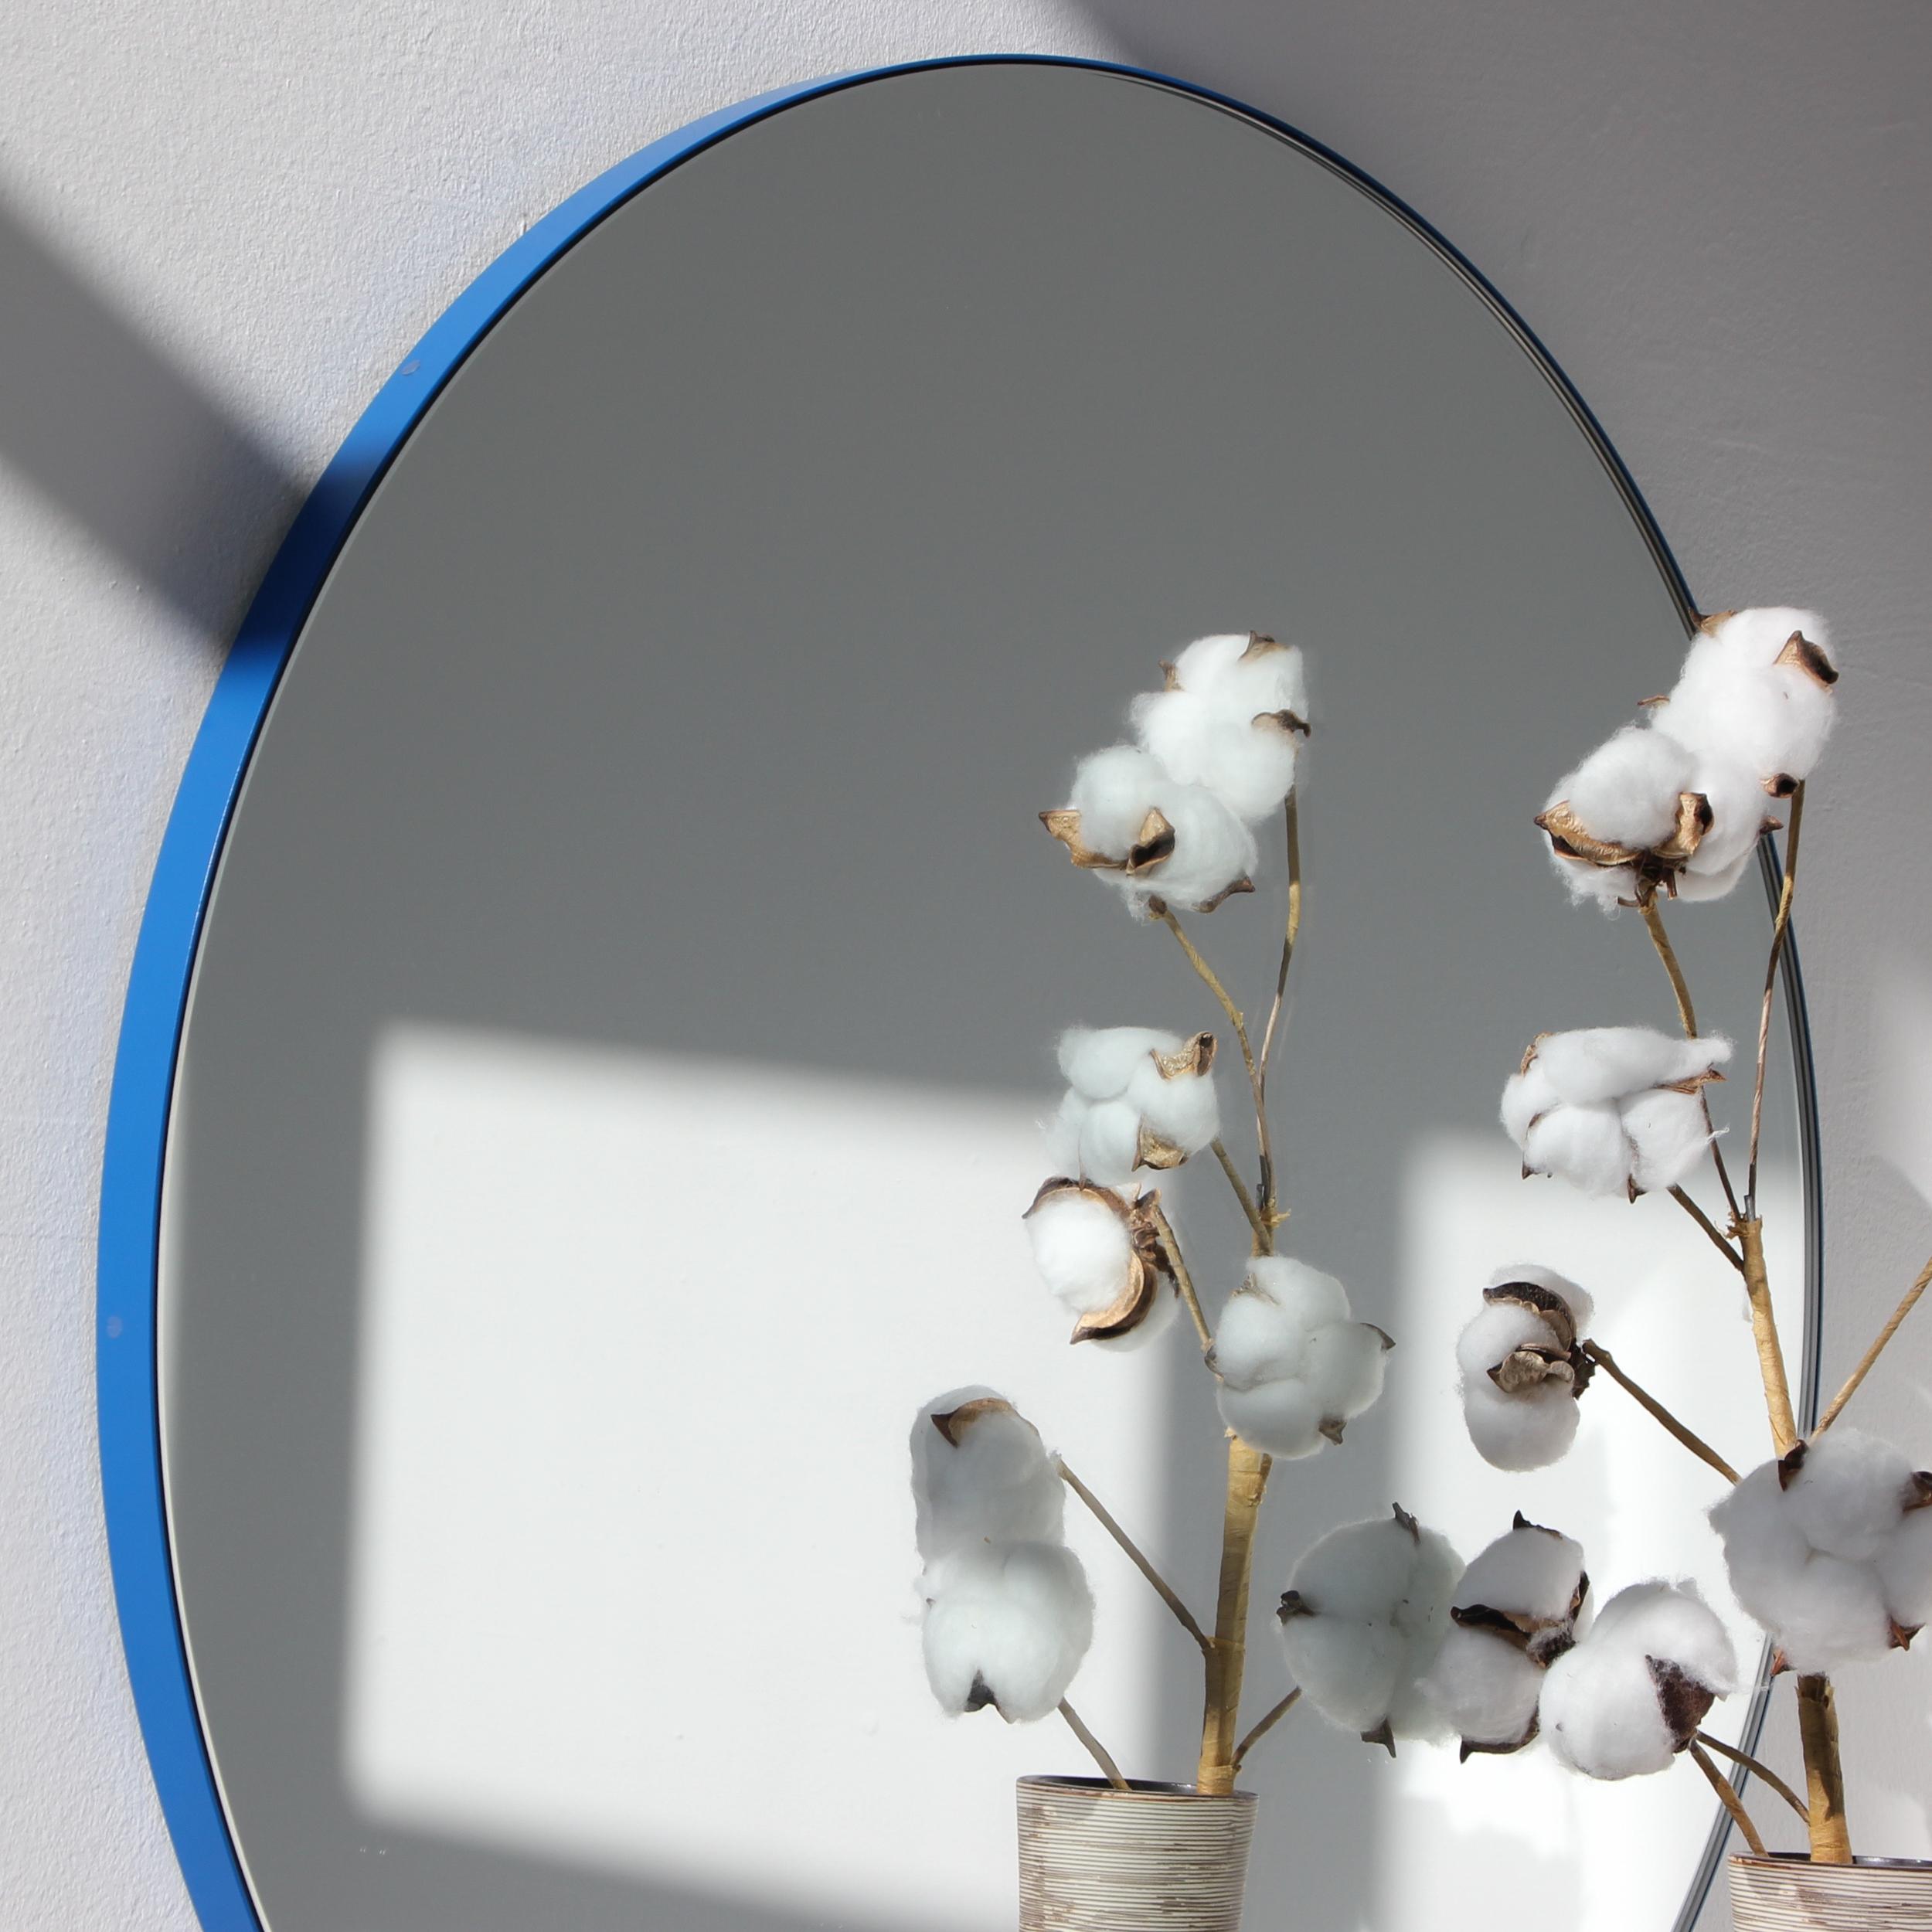 Powder-Coated Orbis Round Contemporary Mirror with Blue Frame, Regular For Sale